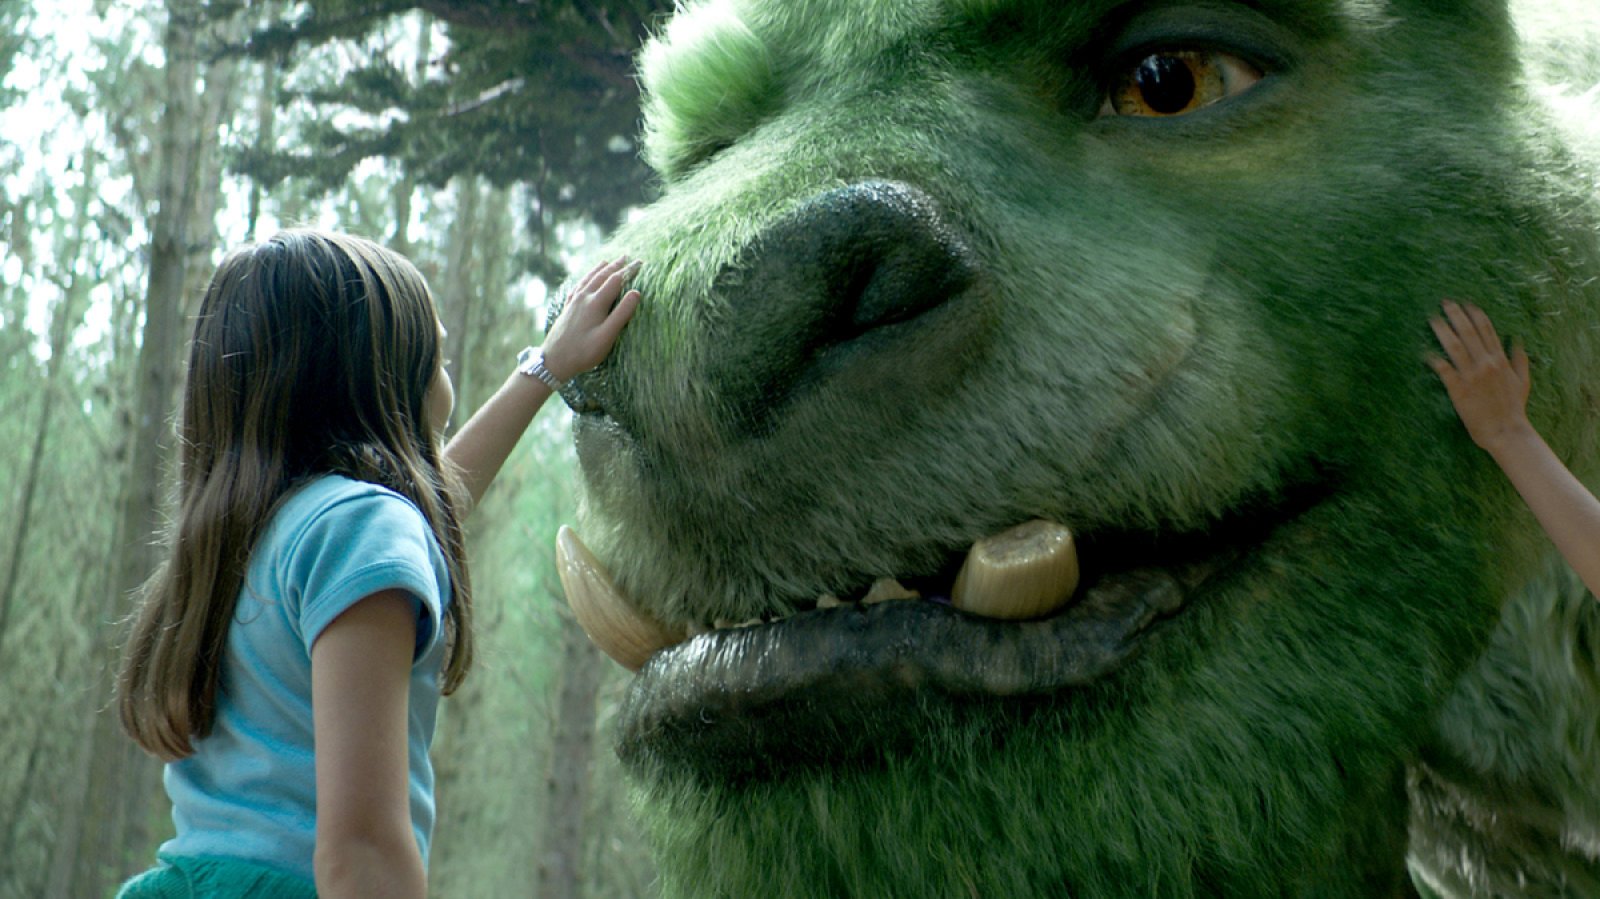 A still from the 2016 live-action remake of Pete's Dragon